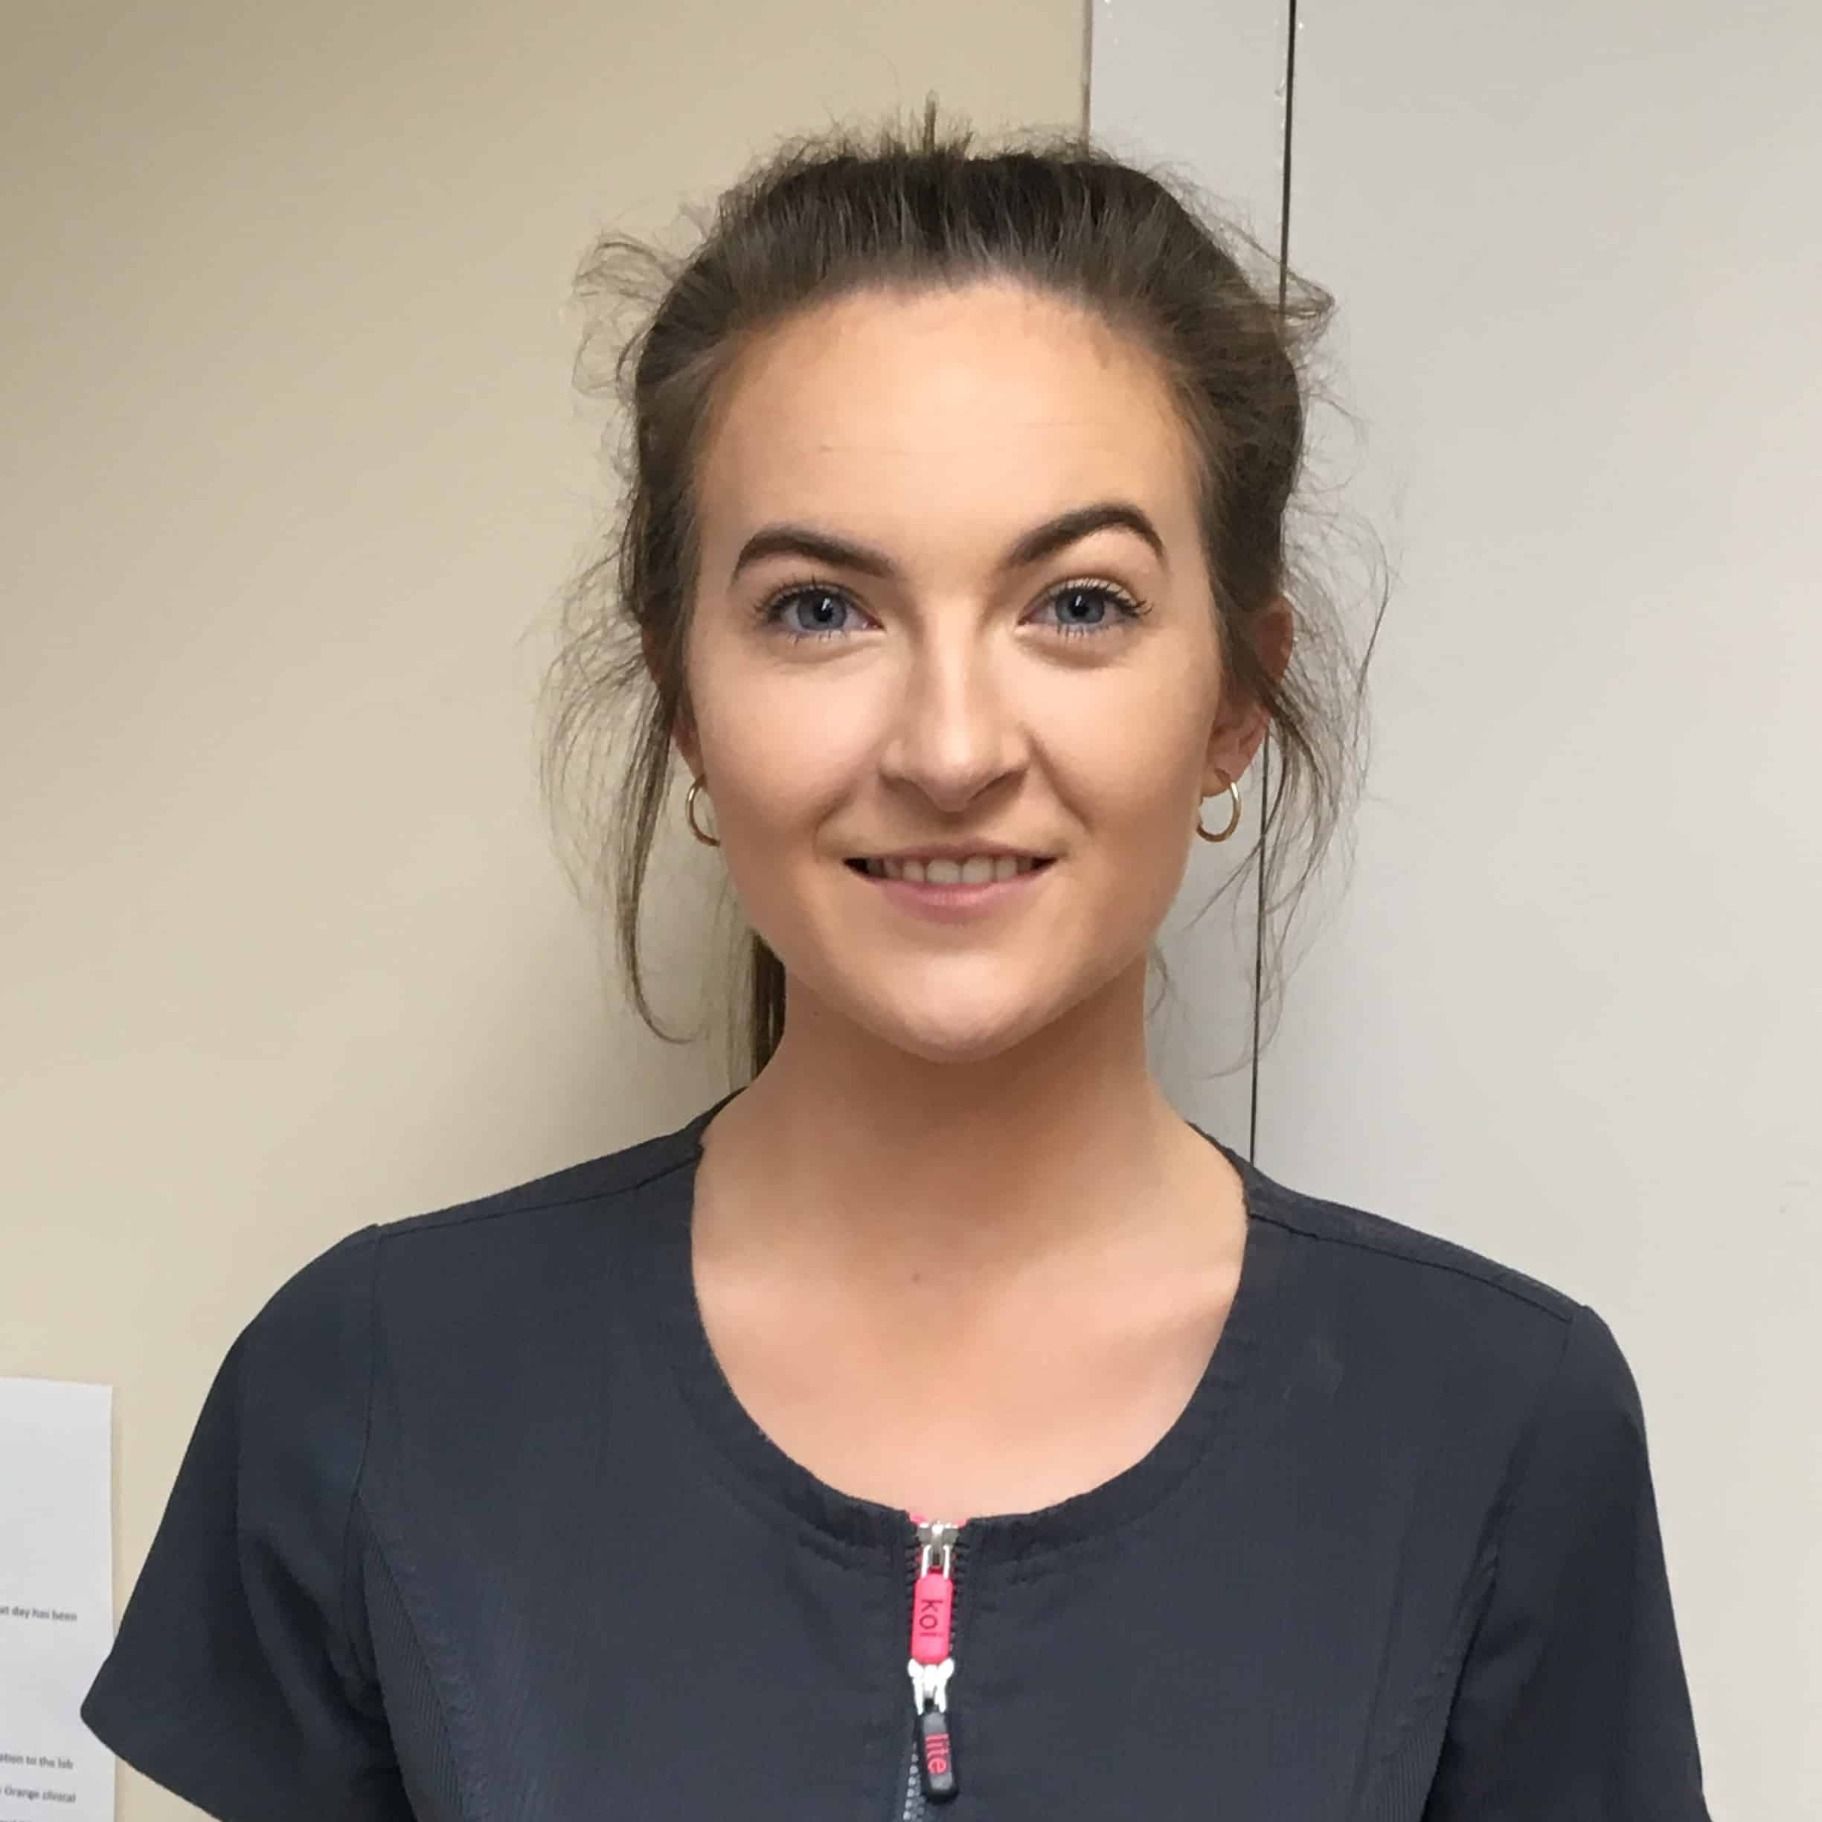 Georgina started at Beechwood in June 2018 as a trainee veterinary nurse. She has always had a passion to work with animals and intends to go on to do further certificates to further her career as a nurse. Outside of work she enjoys lazy movie days and socialising.